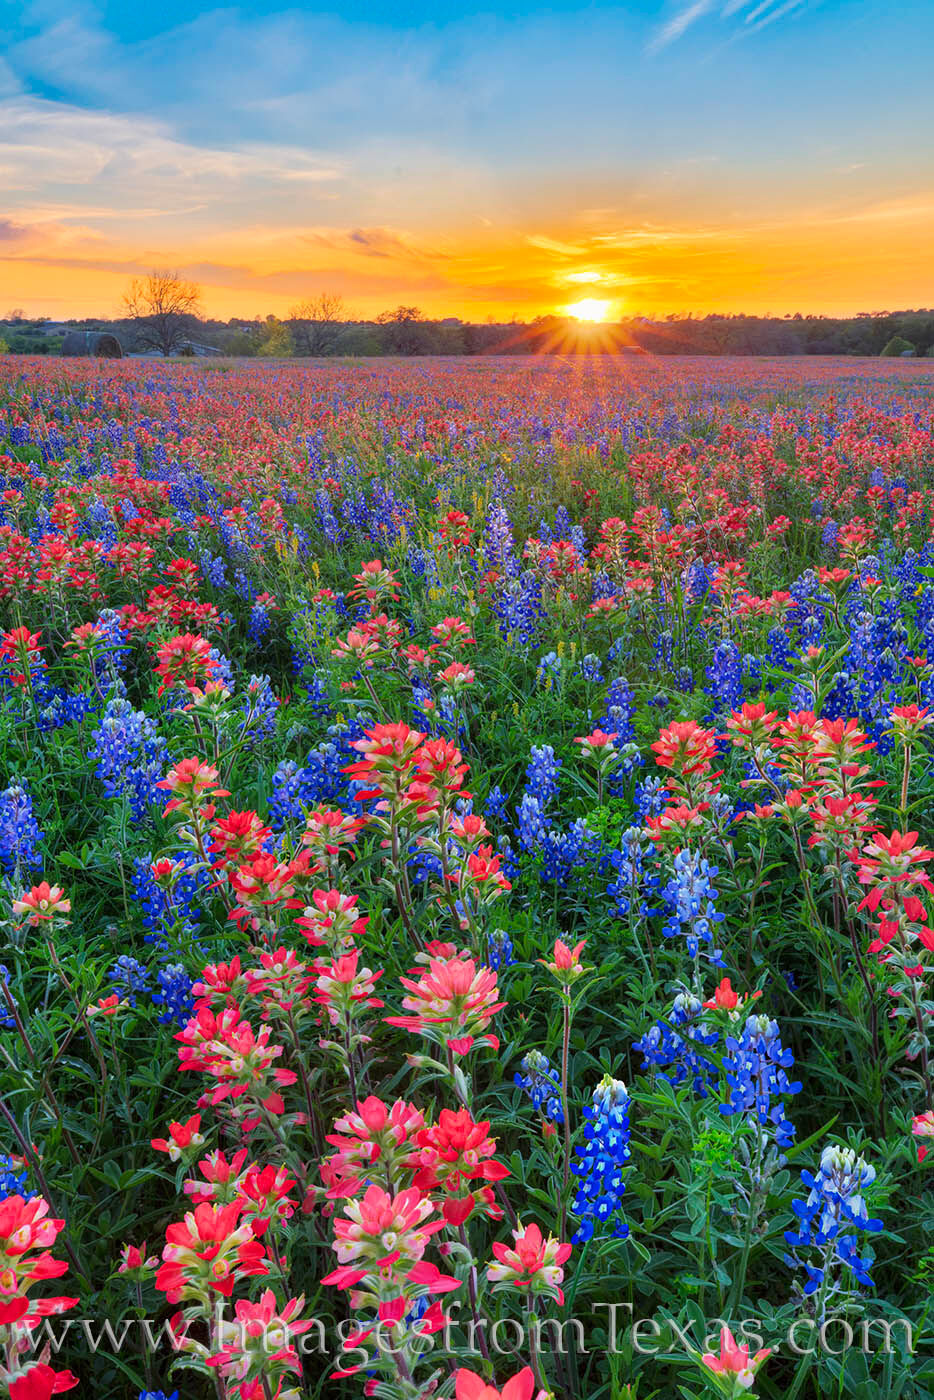 On a quiet field in Washington County not too far from Brenham, a beautiful field of bluebonnets and Indian blankets glow with...